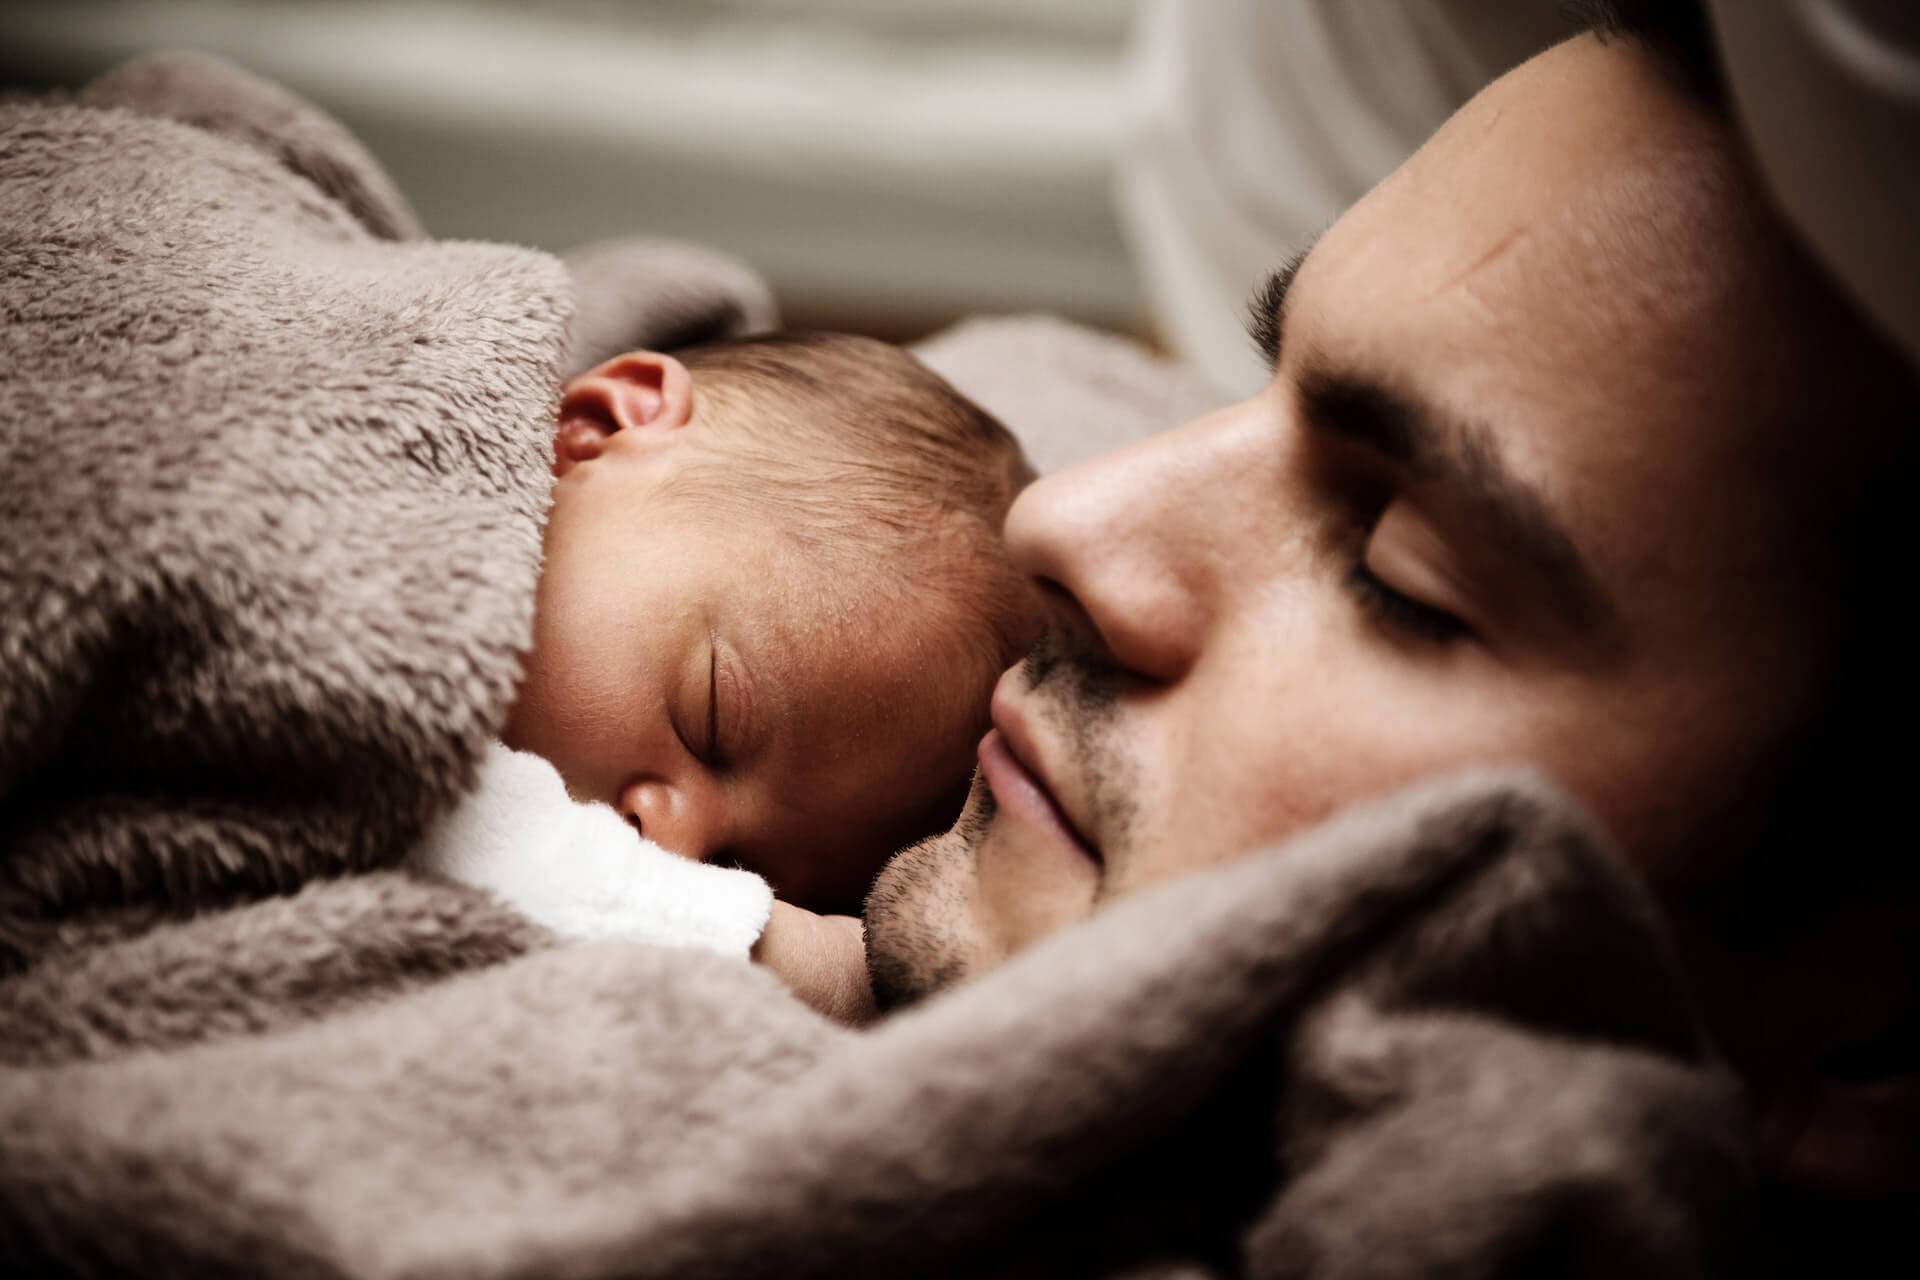 The best way for new dads to bond with their baby